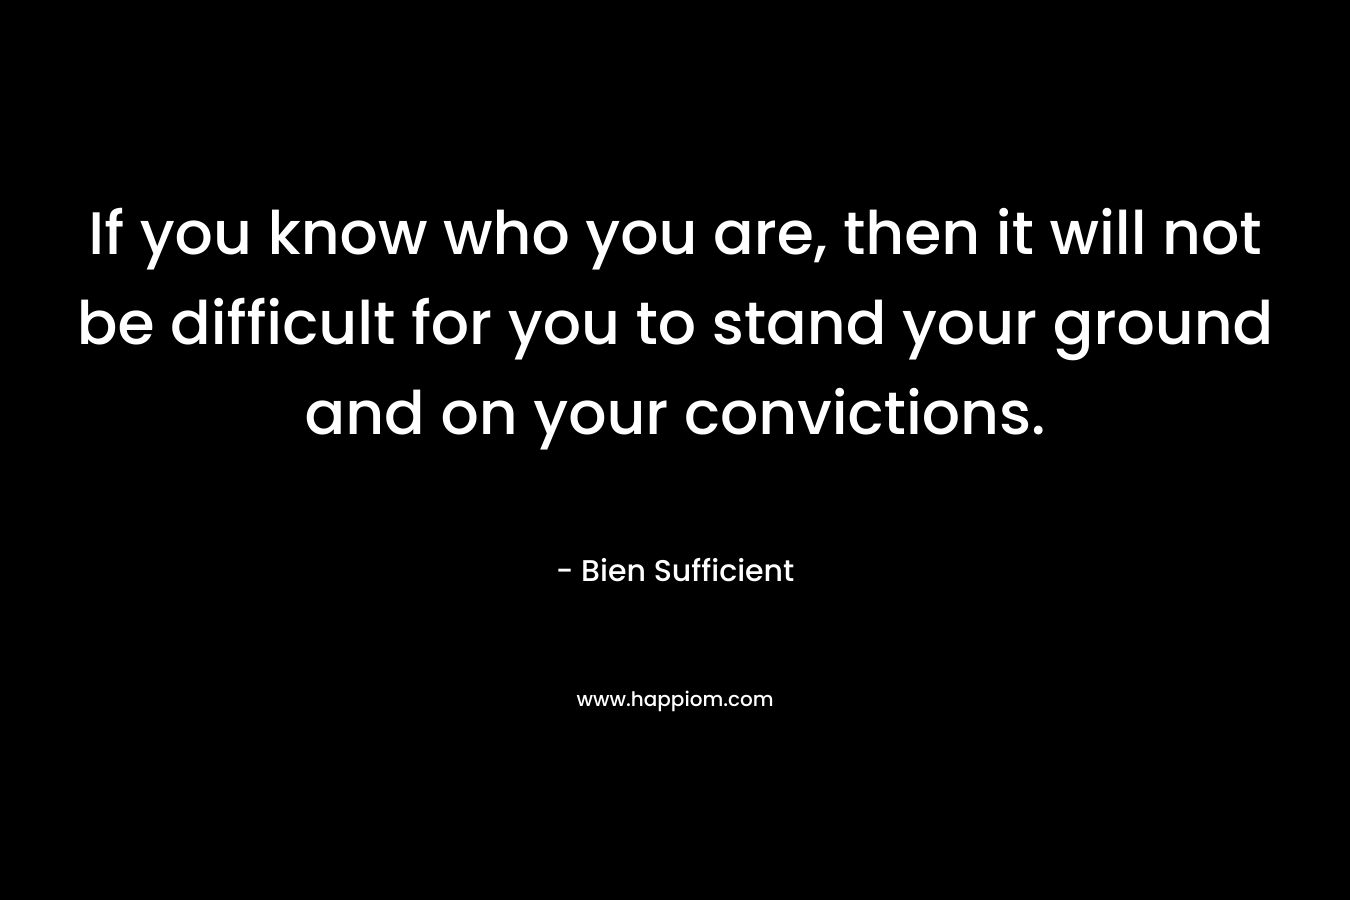 If you know who you are, then it will not be difficult for you to stand your ground and on your convictions.